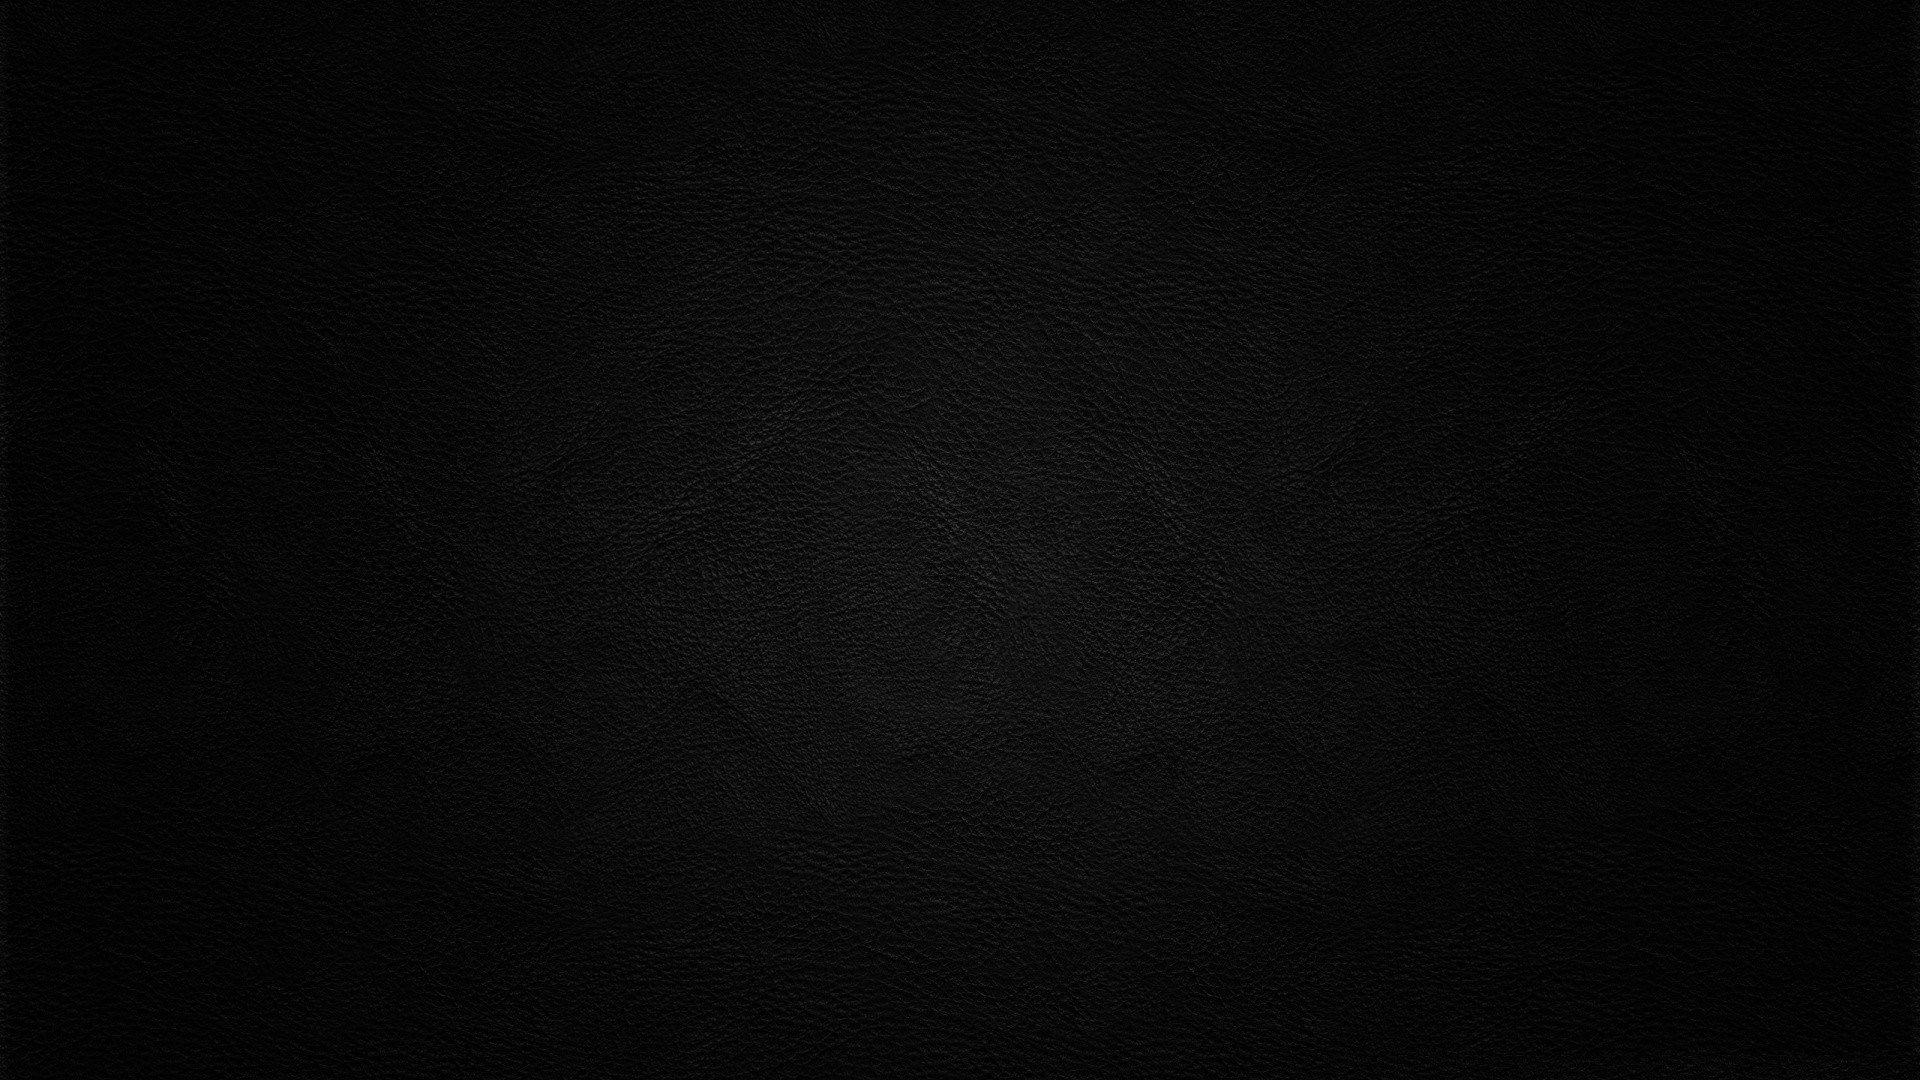 Wallpaper HD Plain Black With high-resolution 1920X1080 pixel. You can use this wallpaper for your Desktop Computer Backgrounds, Mac Wallpapers, Android Lock screen or iPhone Screensavers and another smartphone device